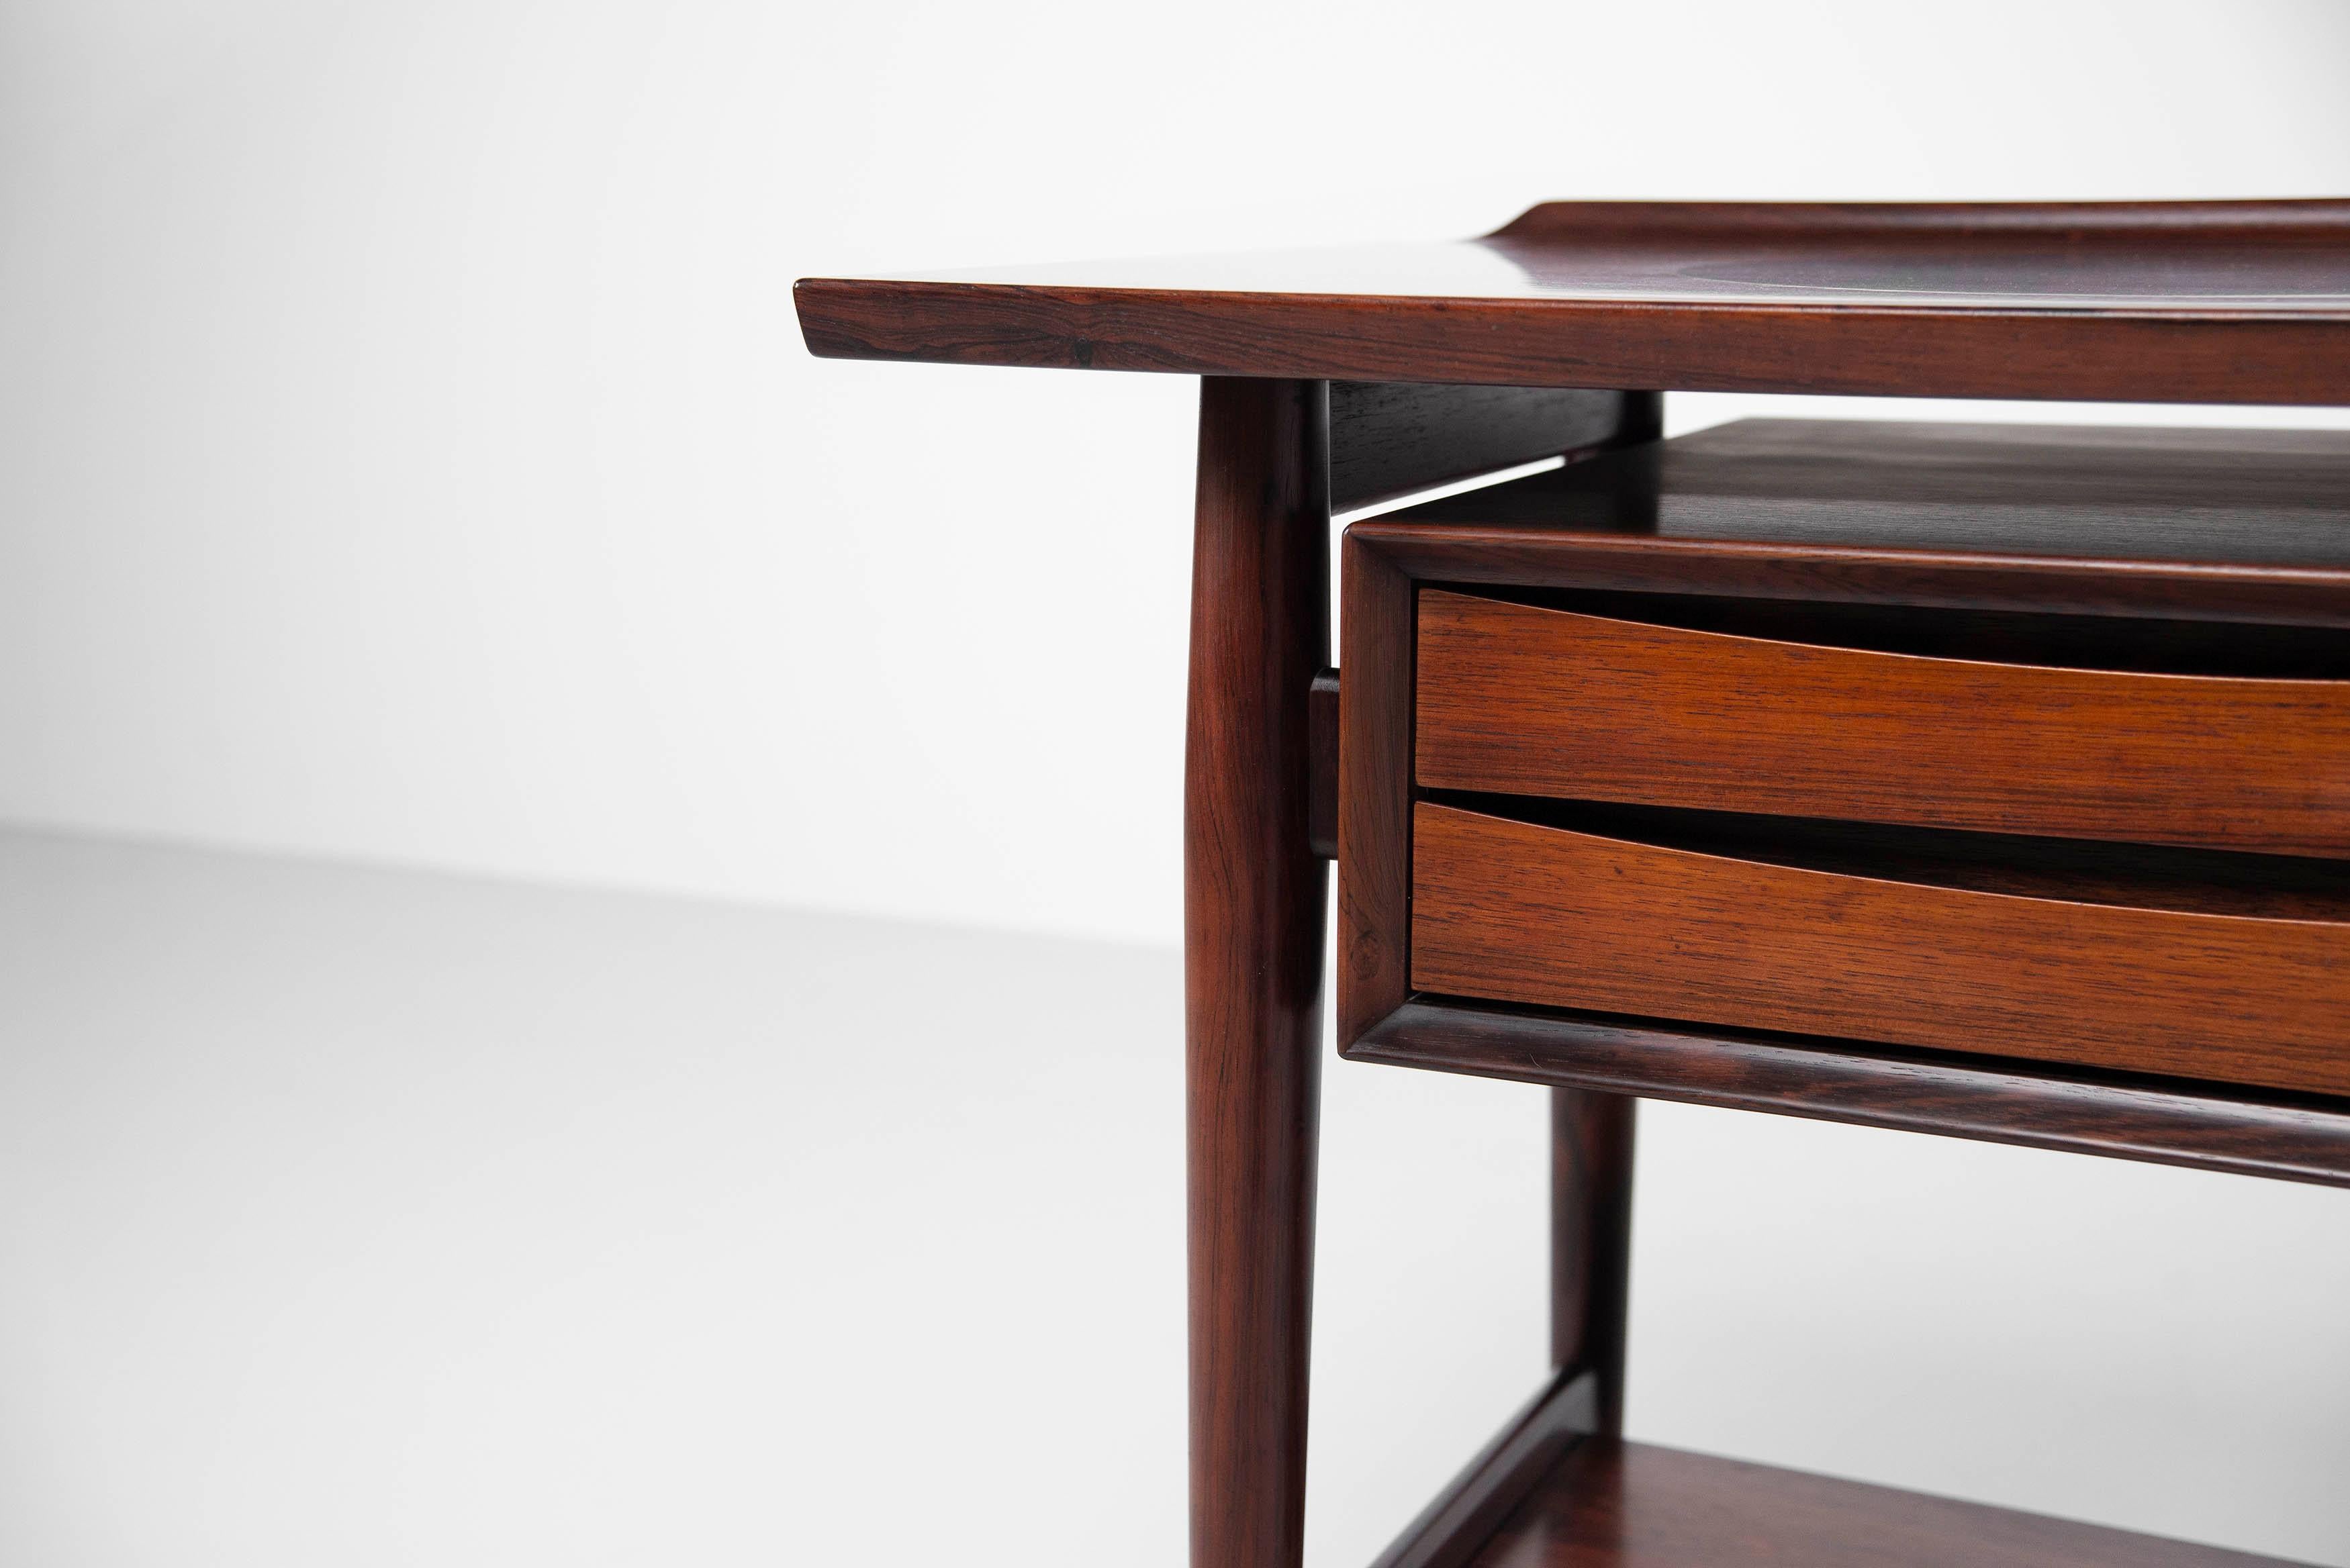 Stunning drawer console table model 218 designed by Arne Vodder and manufactured by Sibast Mobler, Denmark 1960. This drawer console is made of rosewood veneer and has a fantastic warm grain to the rosewood. The console table has 4 drawers with the